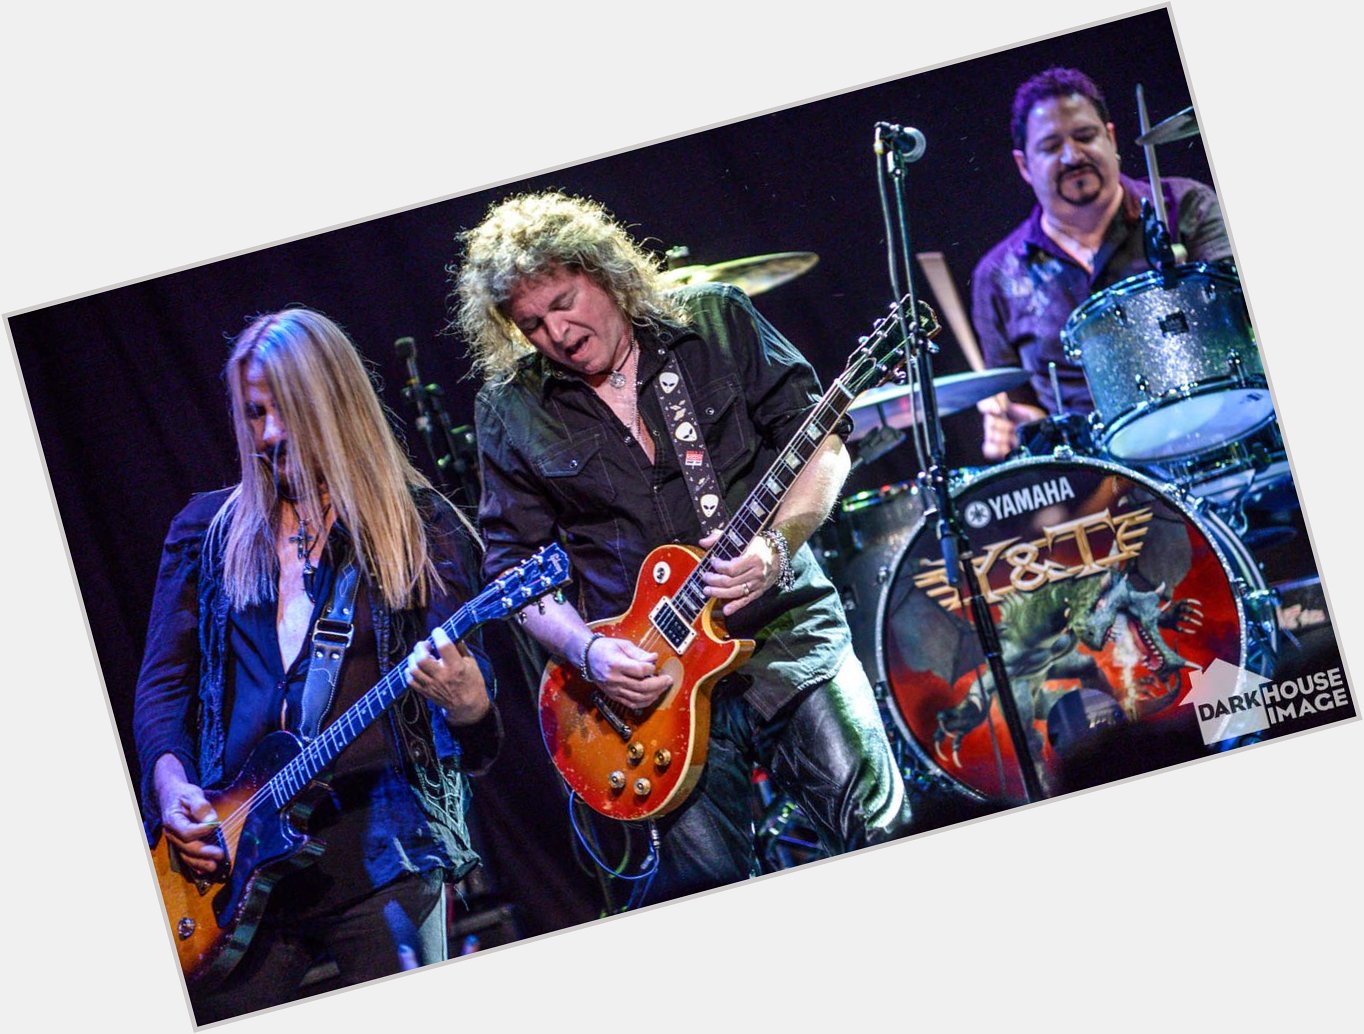 A very happy birthday to the great Dave Meniketti!!! 